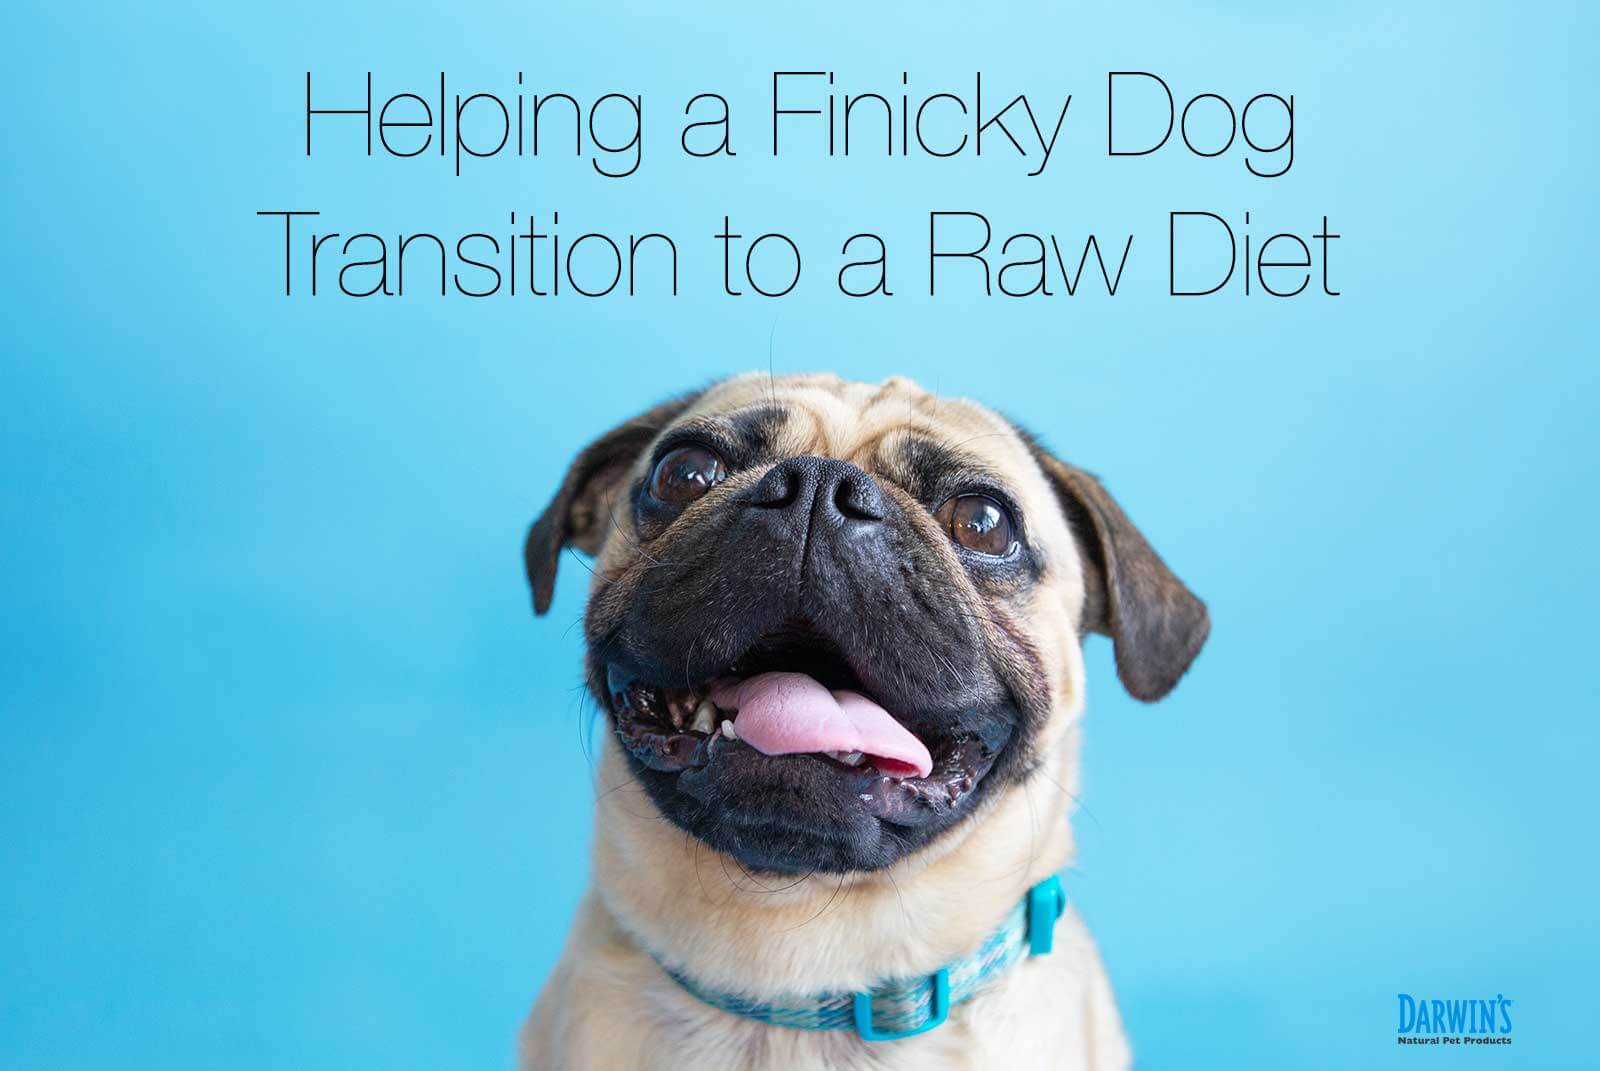 Helping a Finicky Dog Transition to a Raw Diet